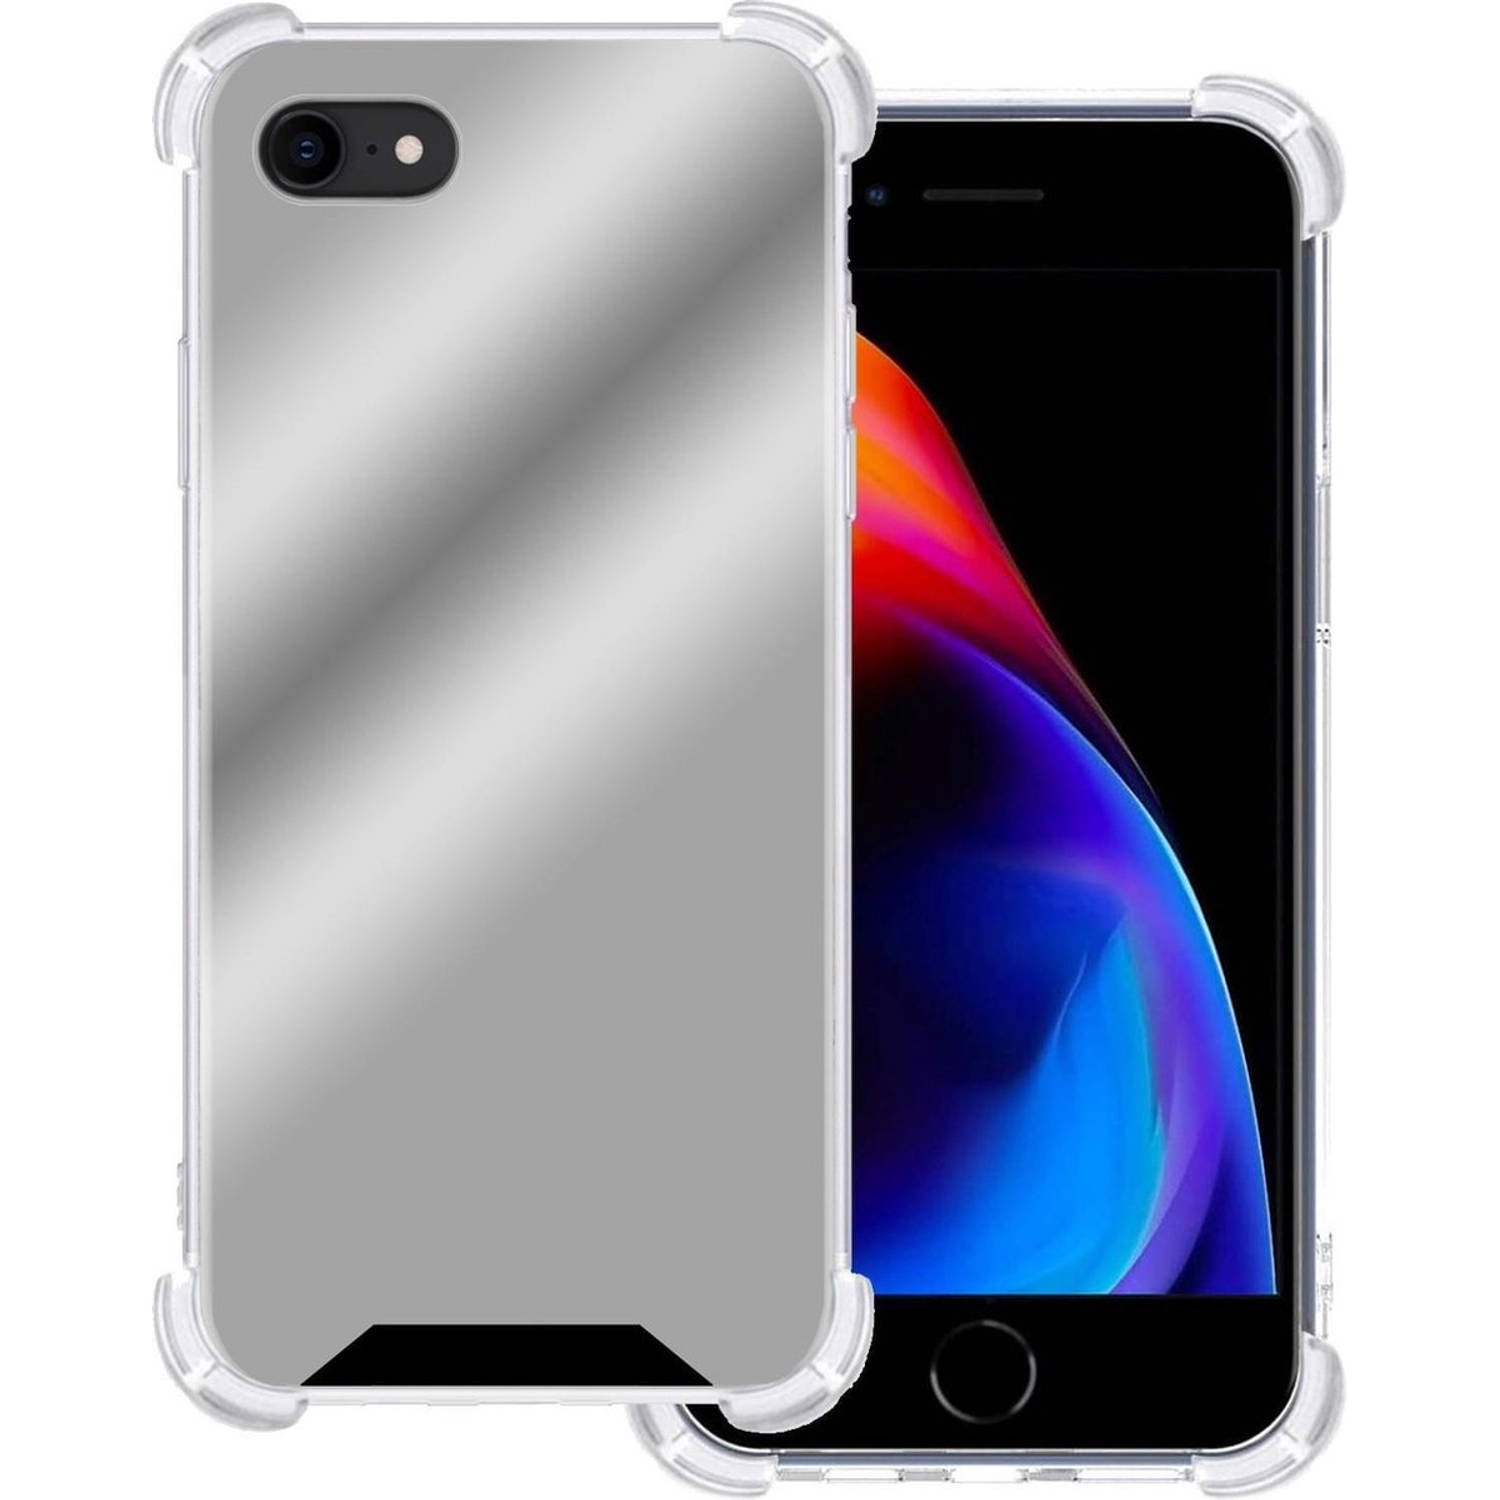 Basey Apple Iphone 7 Hoesje Siliconen Shock Proof Hoes Case Cover Zilver